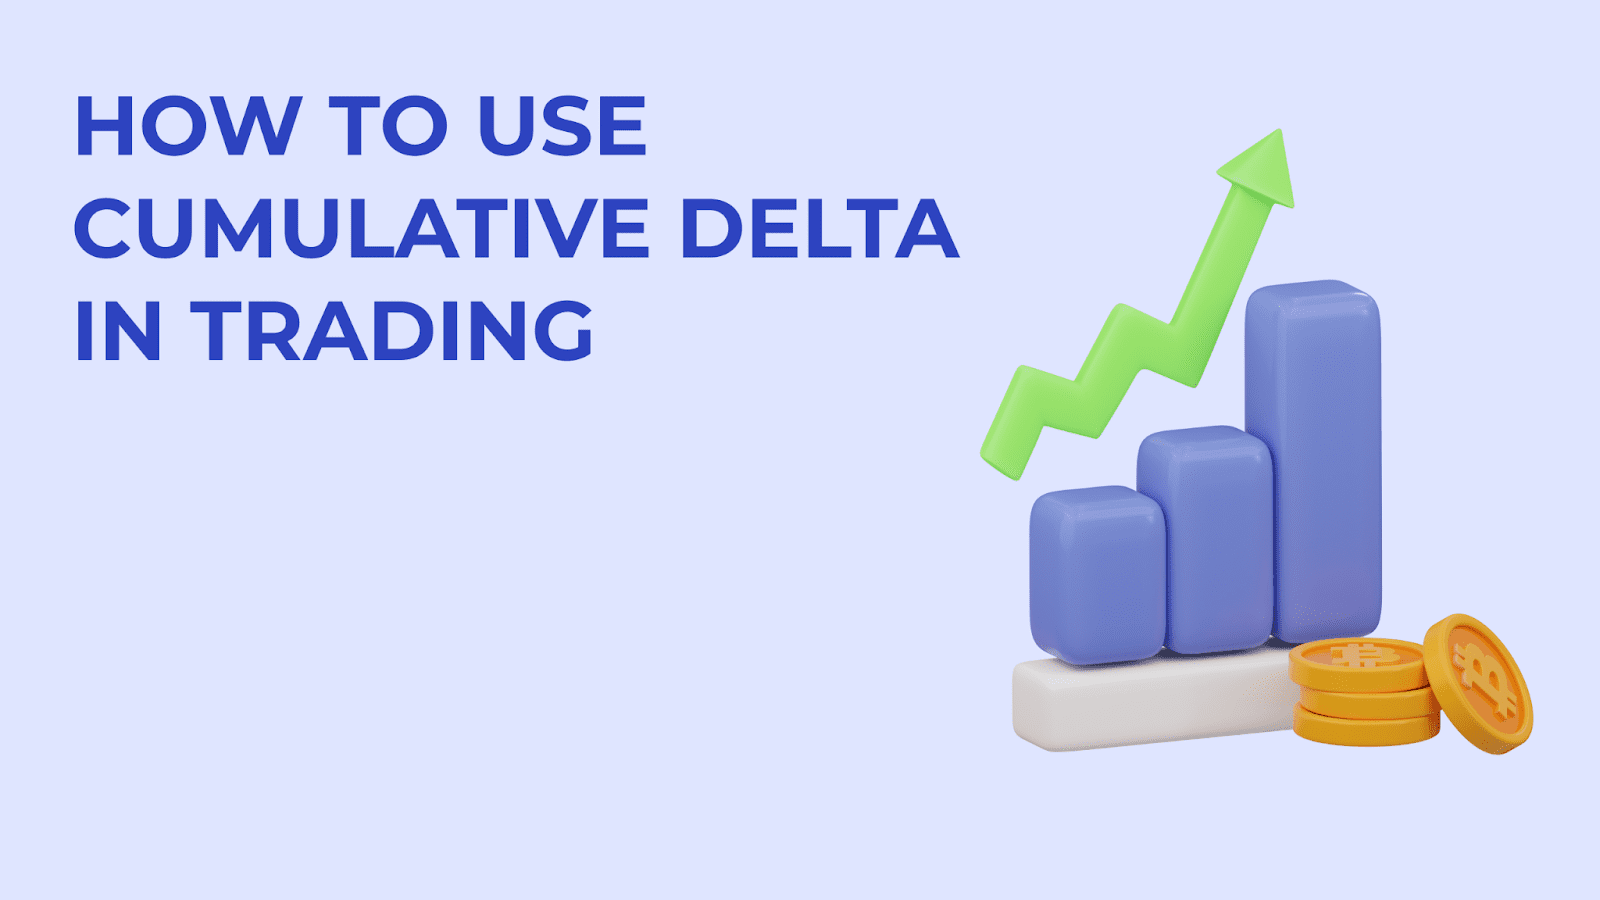 How to use Cumulative Delta in trading